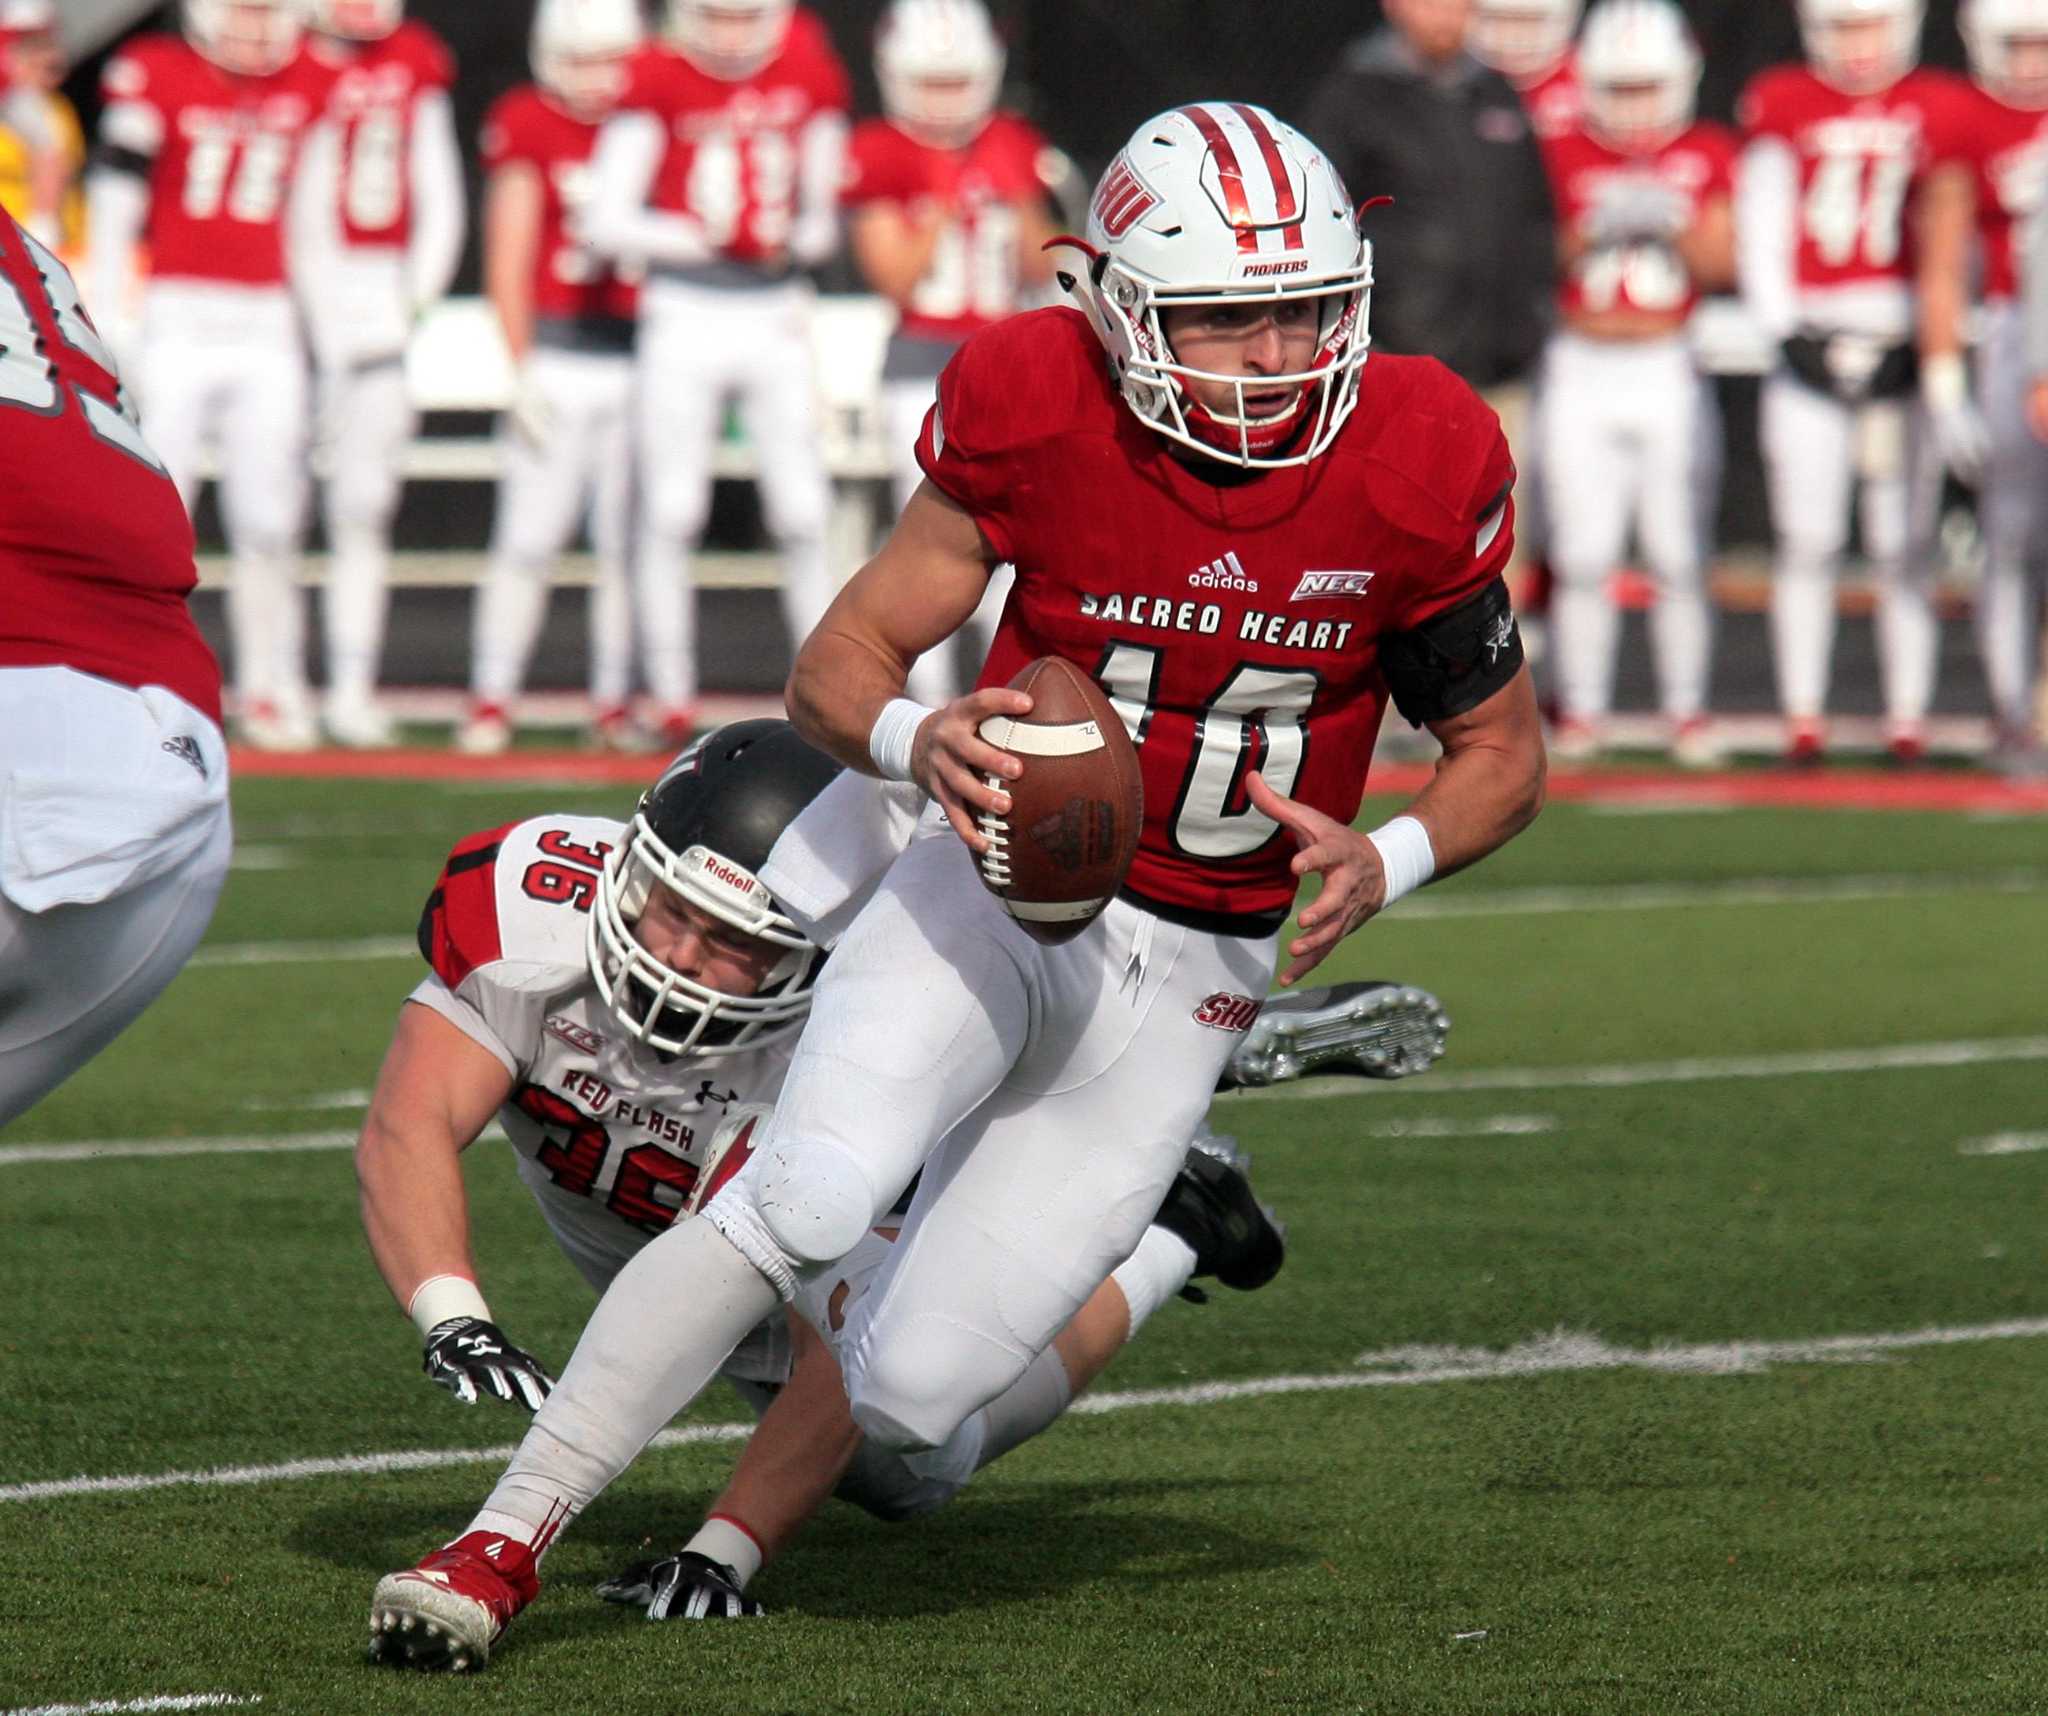 Sacred Heart wins share of NEC football title, tops St. Francis (Pa